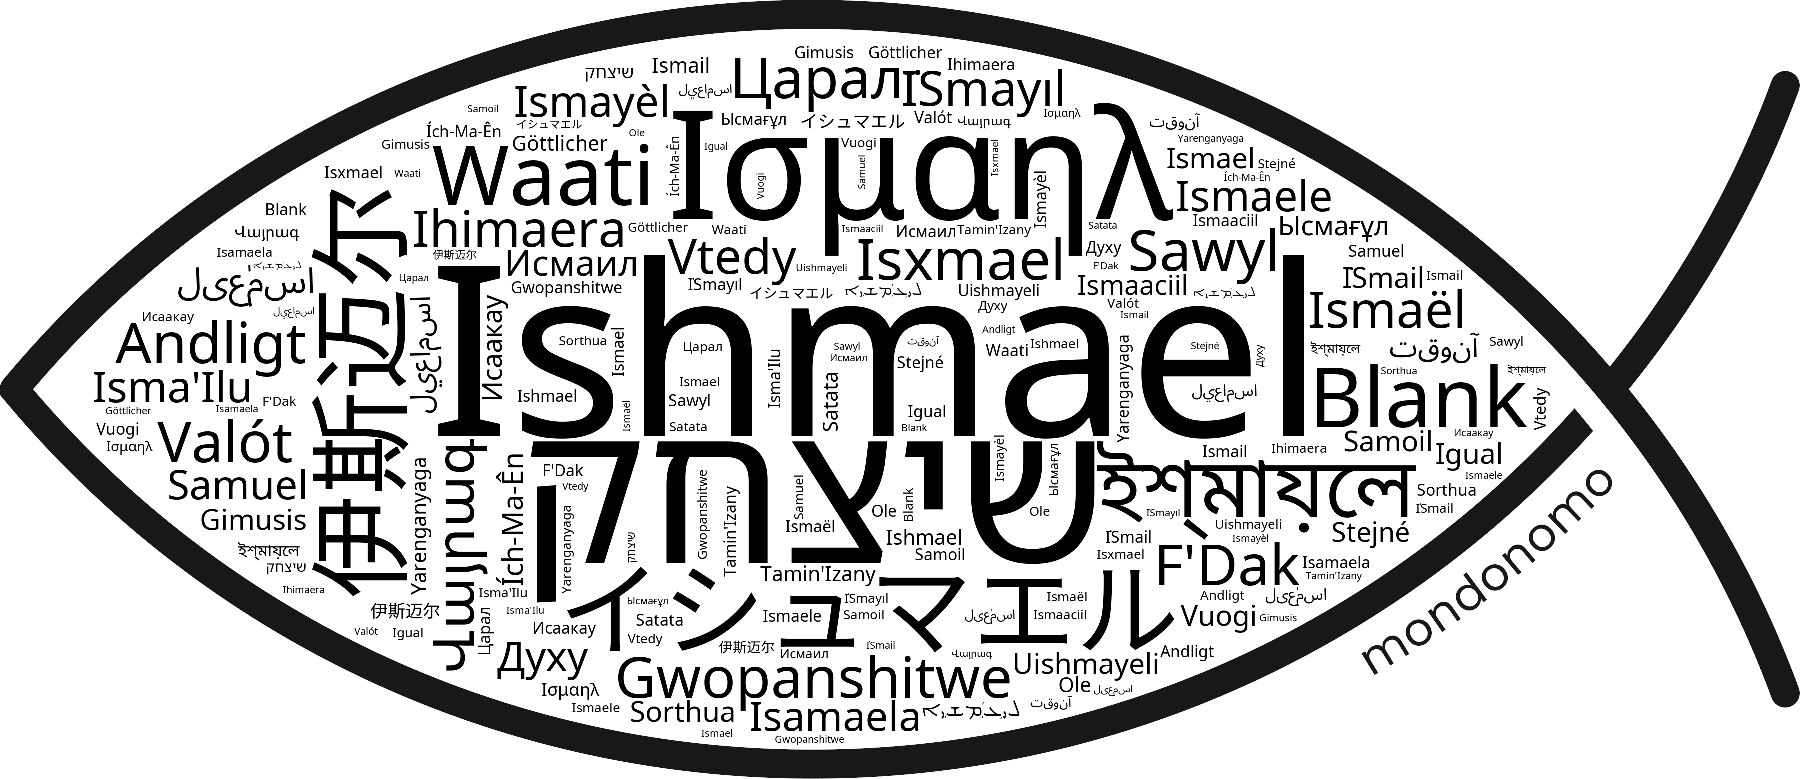 Name Ishmael in the world's Bibles